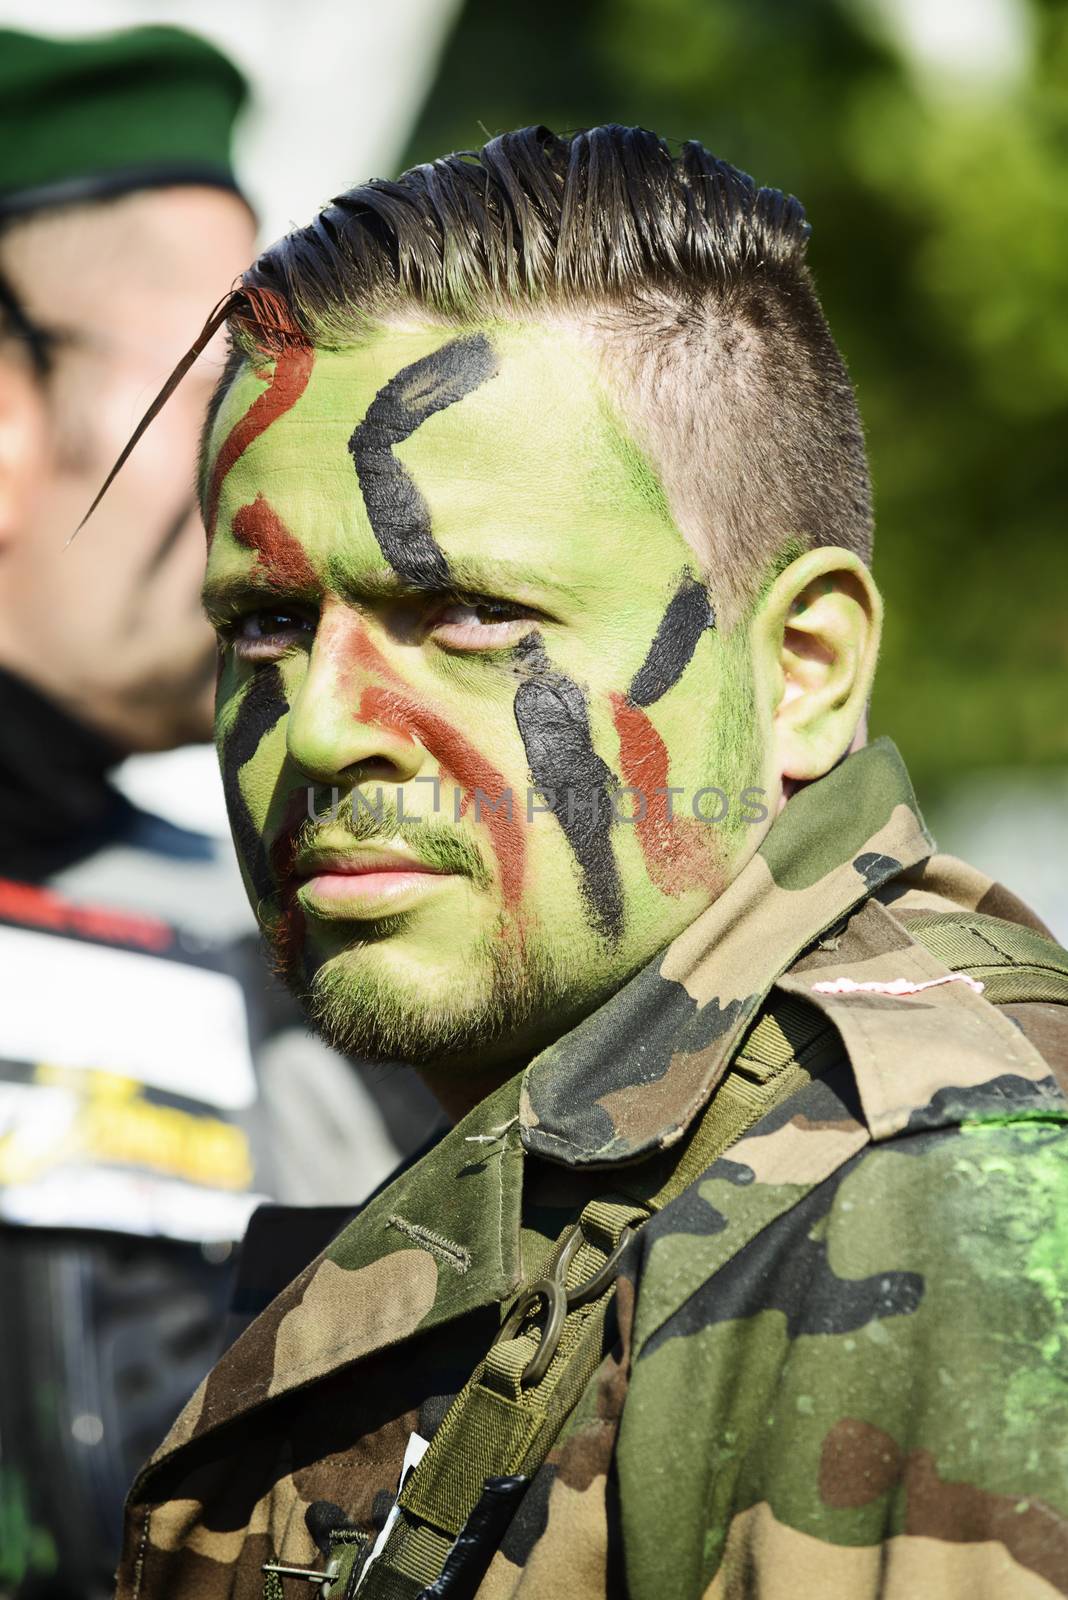 LYON, FRANCE - MAY 24: A man dressed in military commando,  Frappadingue race participating in the event in the Miribel Jonage Park to Lyon on May 25, 2015. People from all walks of life participated in the run.